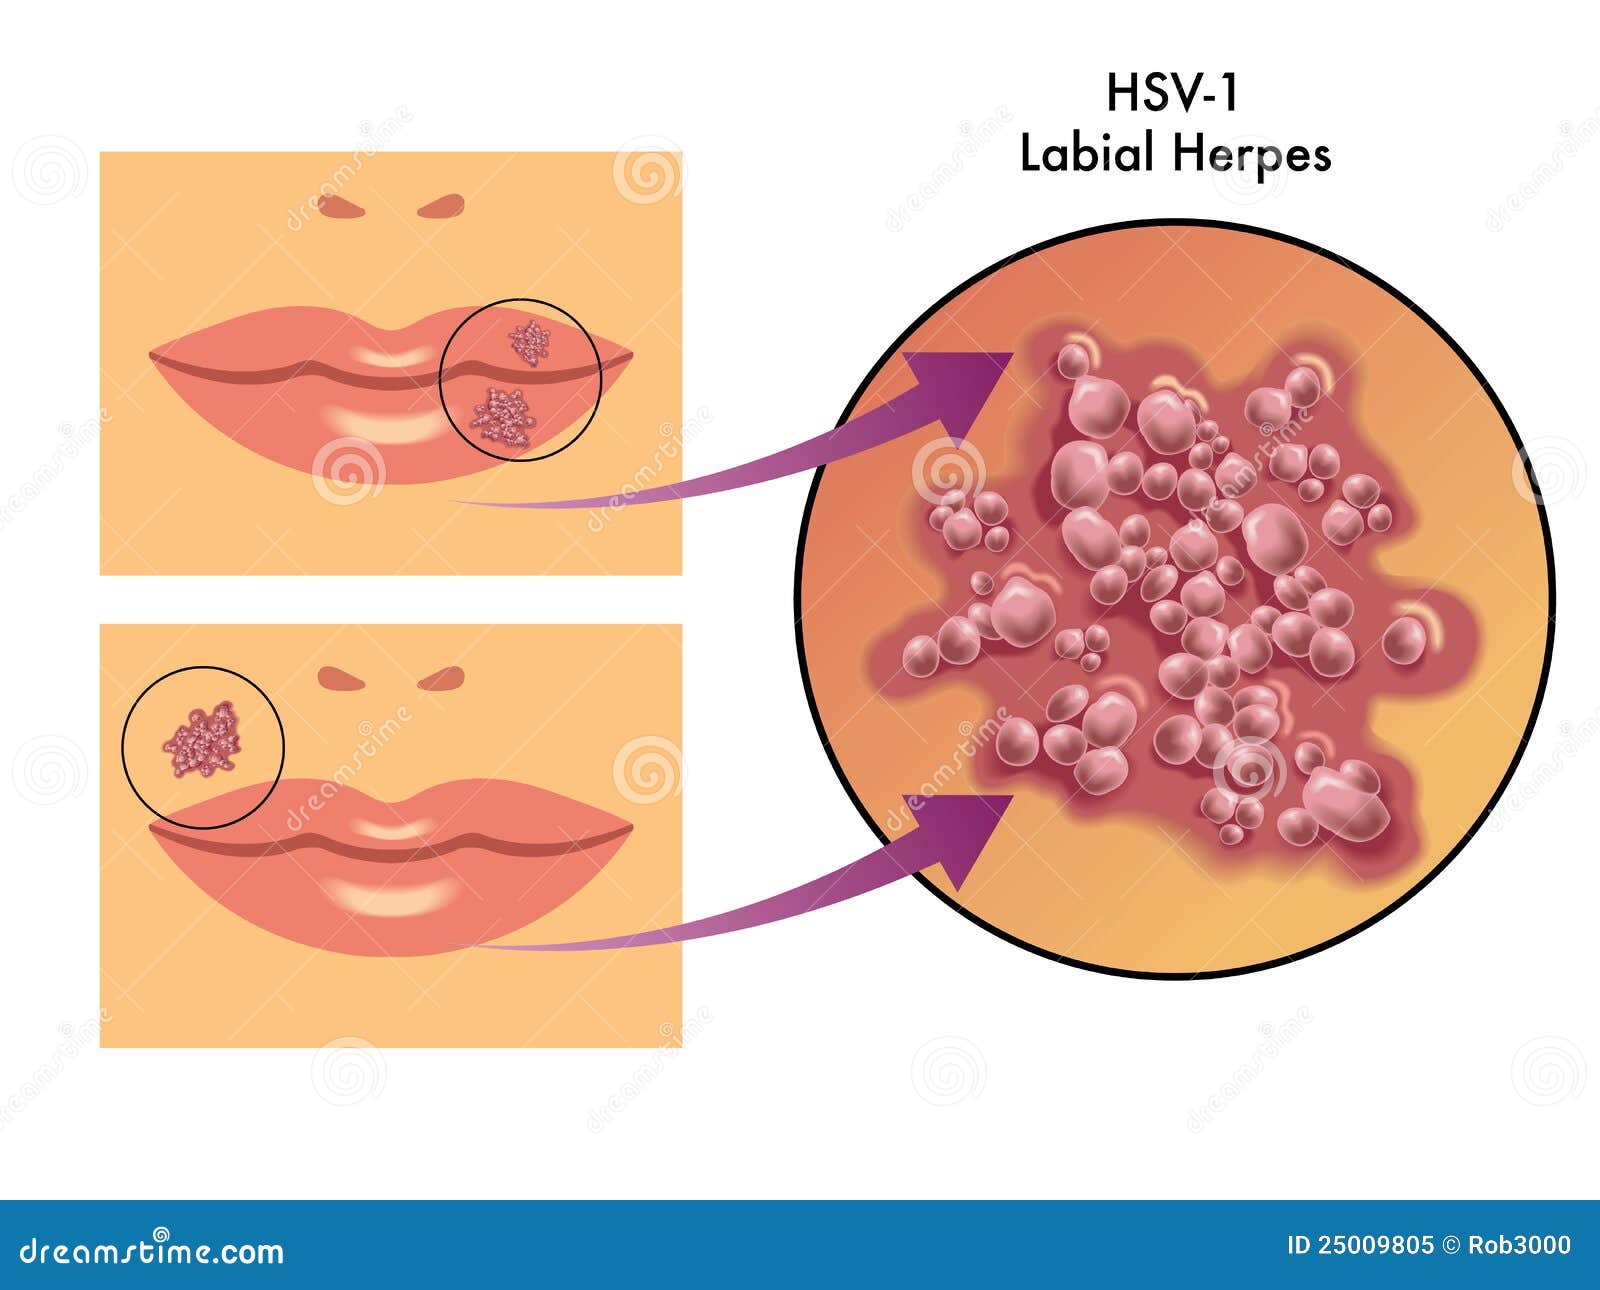 Herpes Pictures HD - Symptoms, Images, Photos and Pictures of Herpes